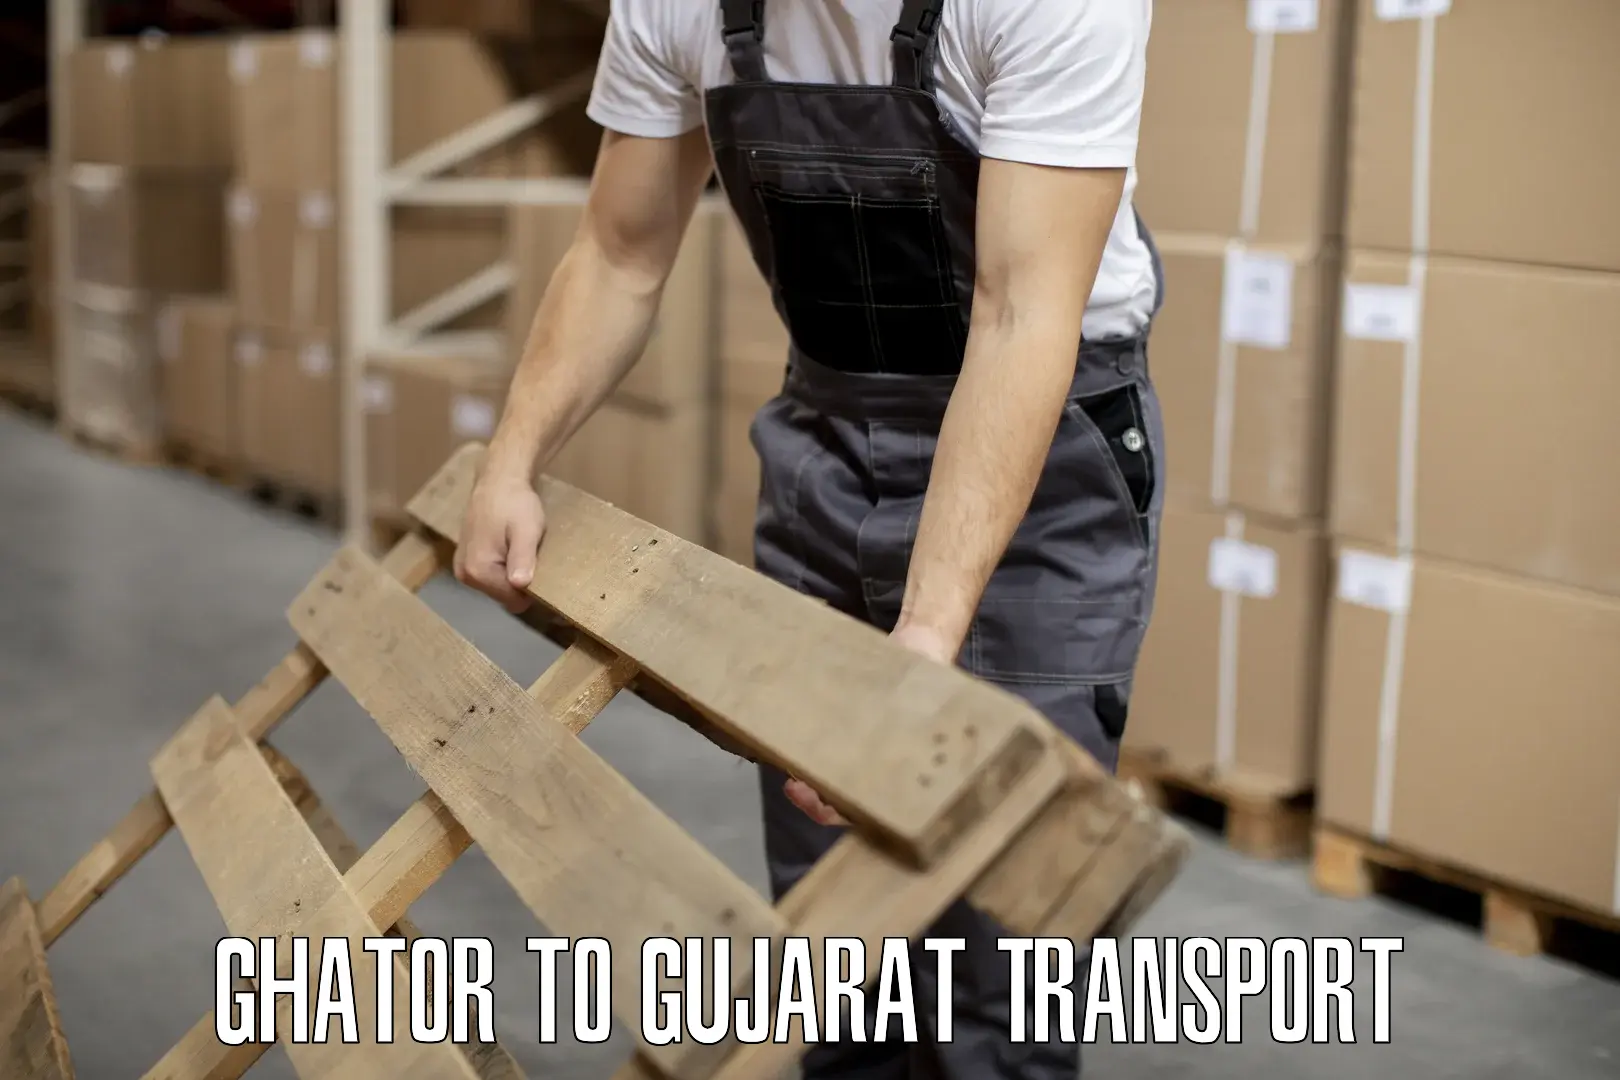 Transport shared services in Ghator to Palitana